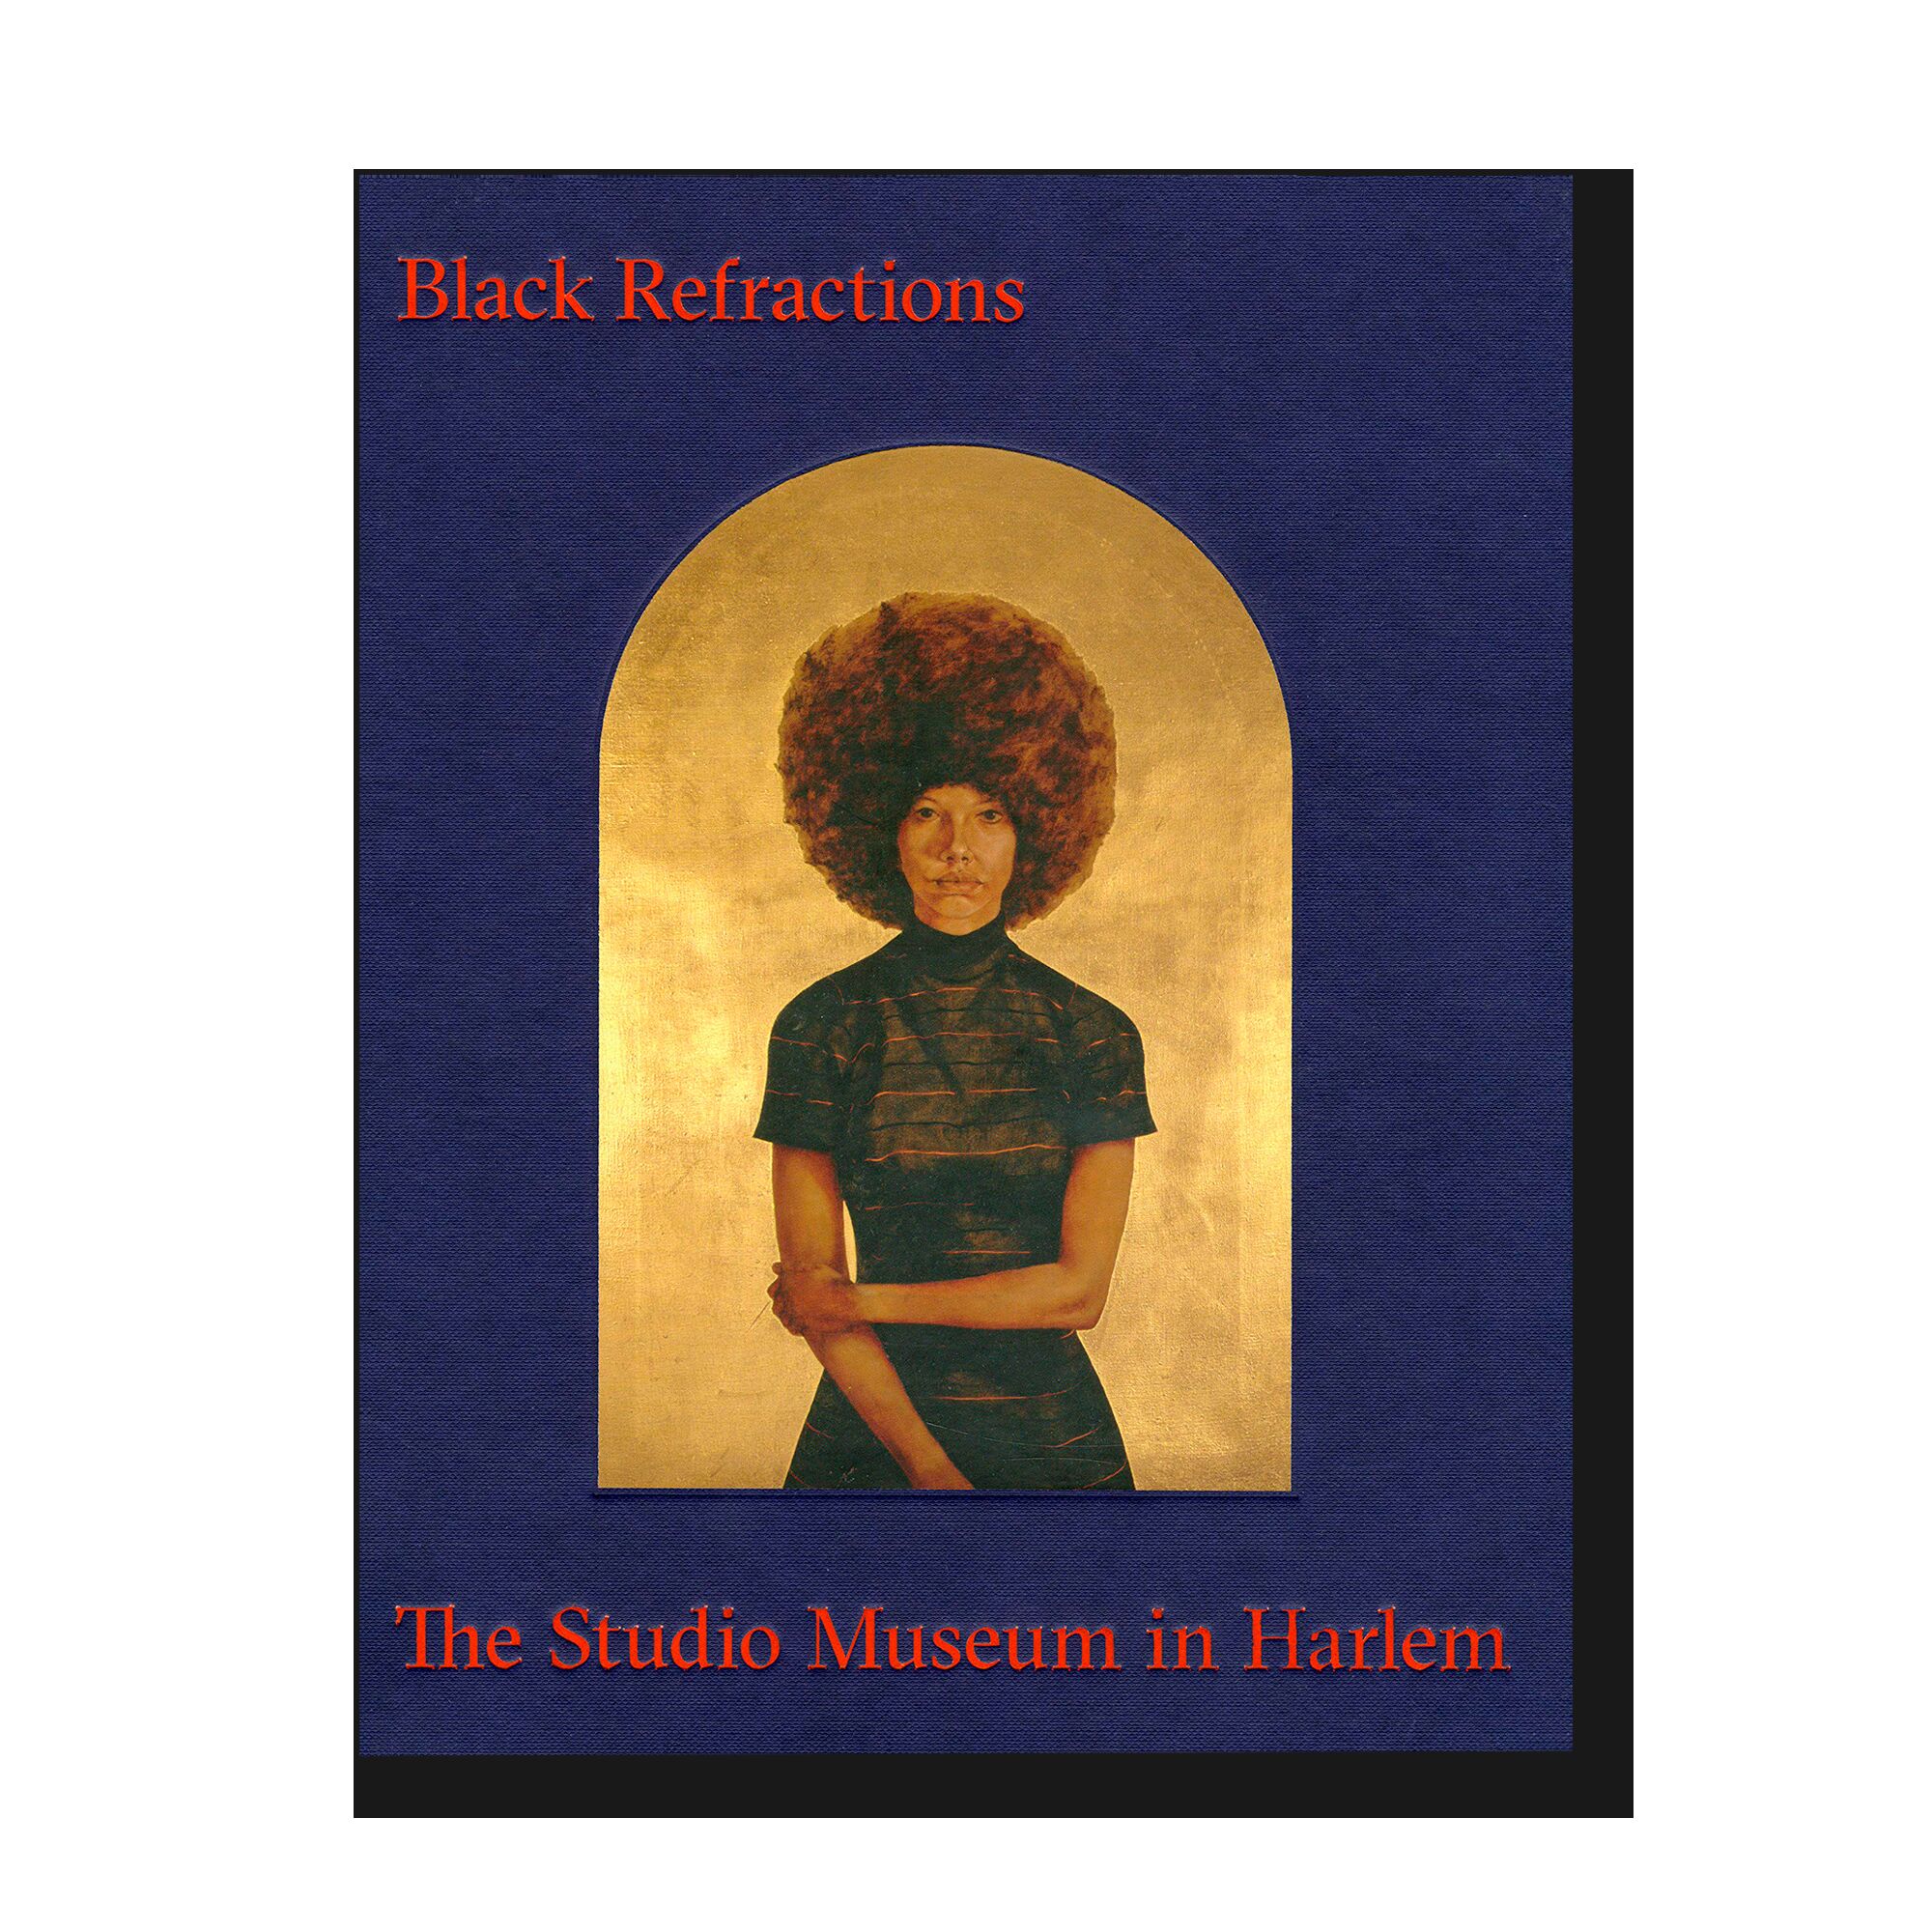 Black Refractions: Highlights from The Studio Museum in Harlem 